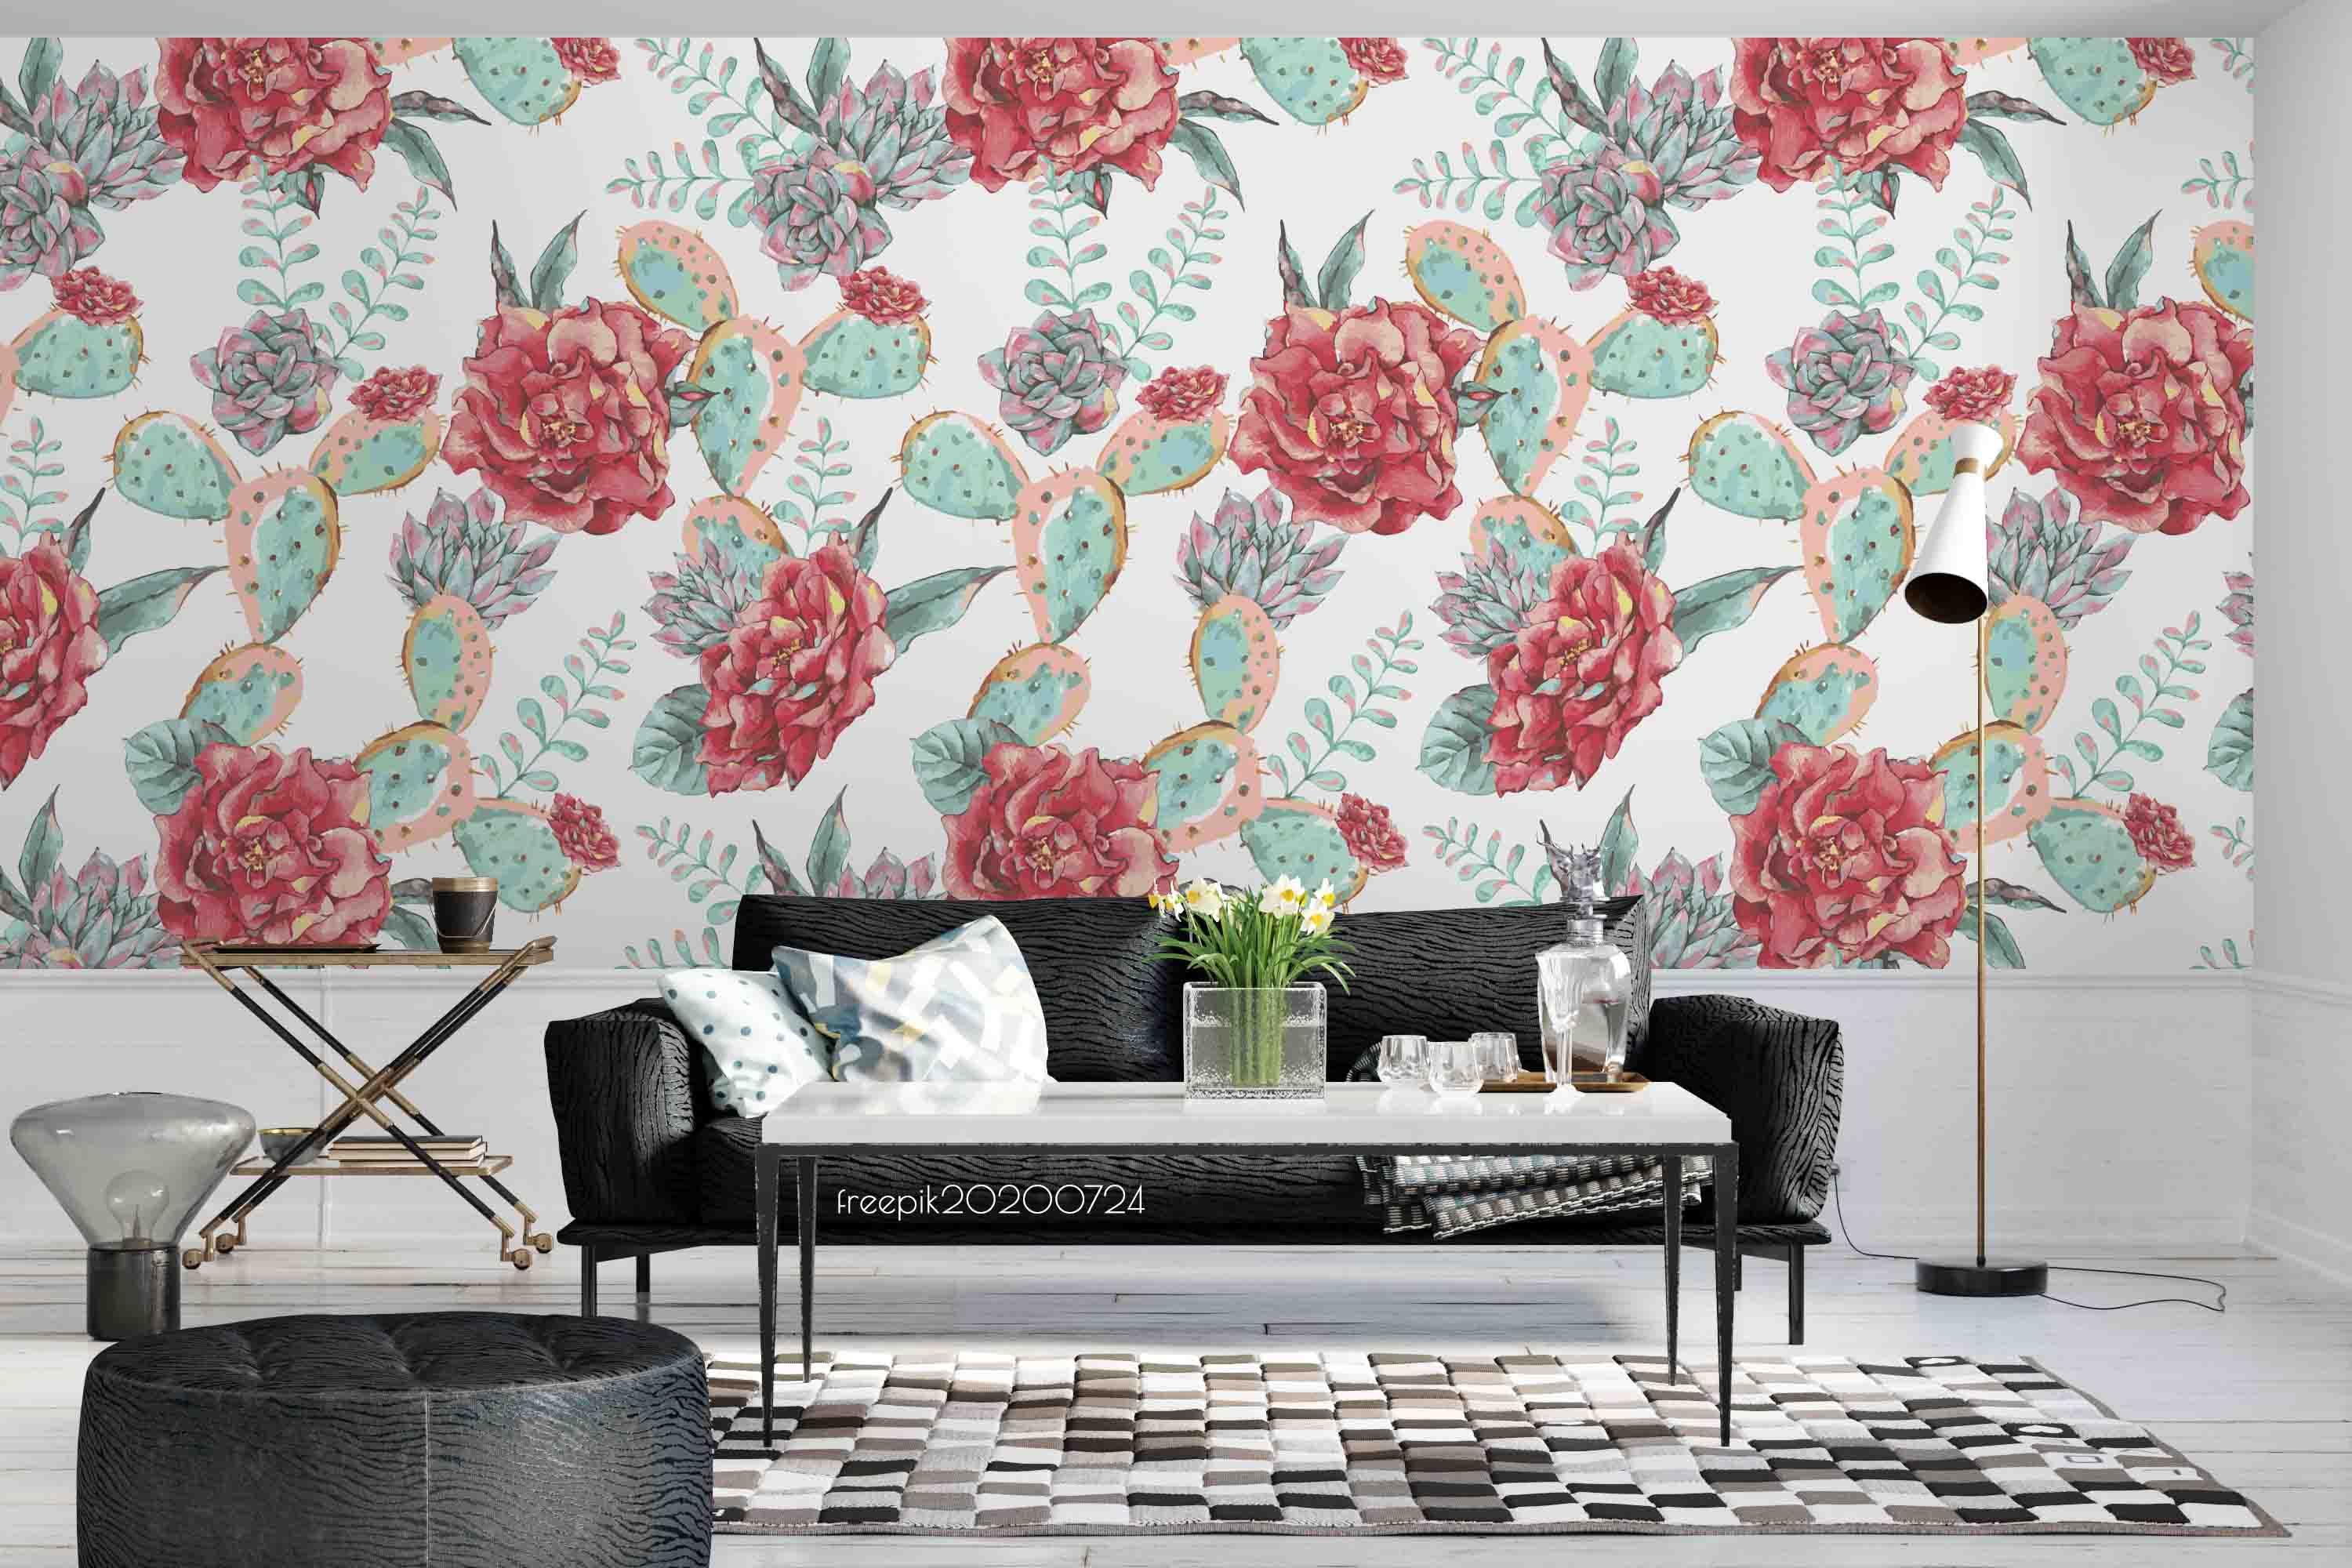 3D Vintage Hand Sketching Colorful Floral Wall Mural Wallpaper LXL 569- Jess Art Decoration